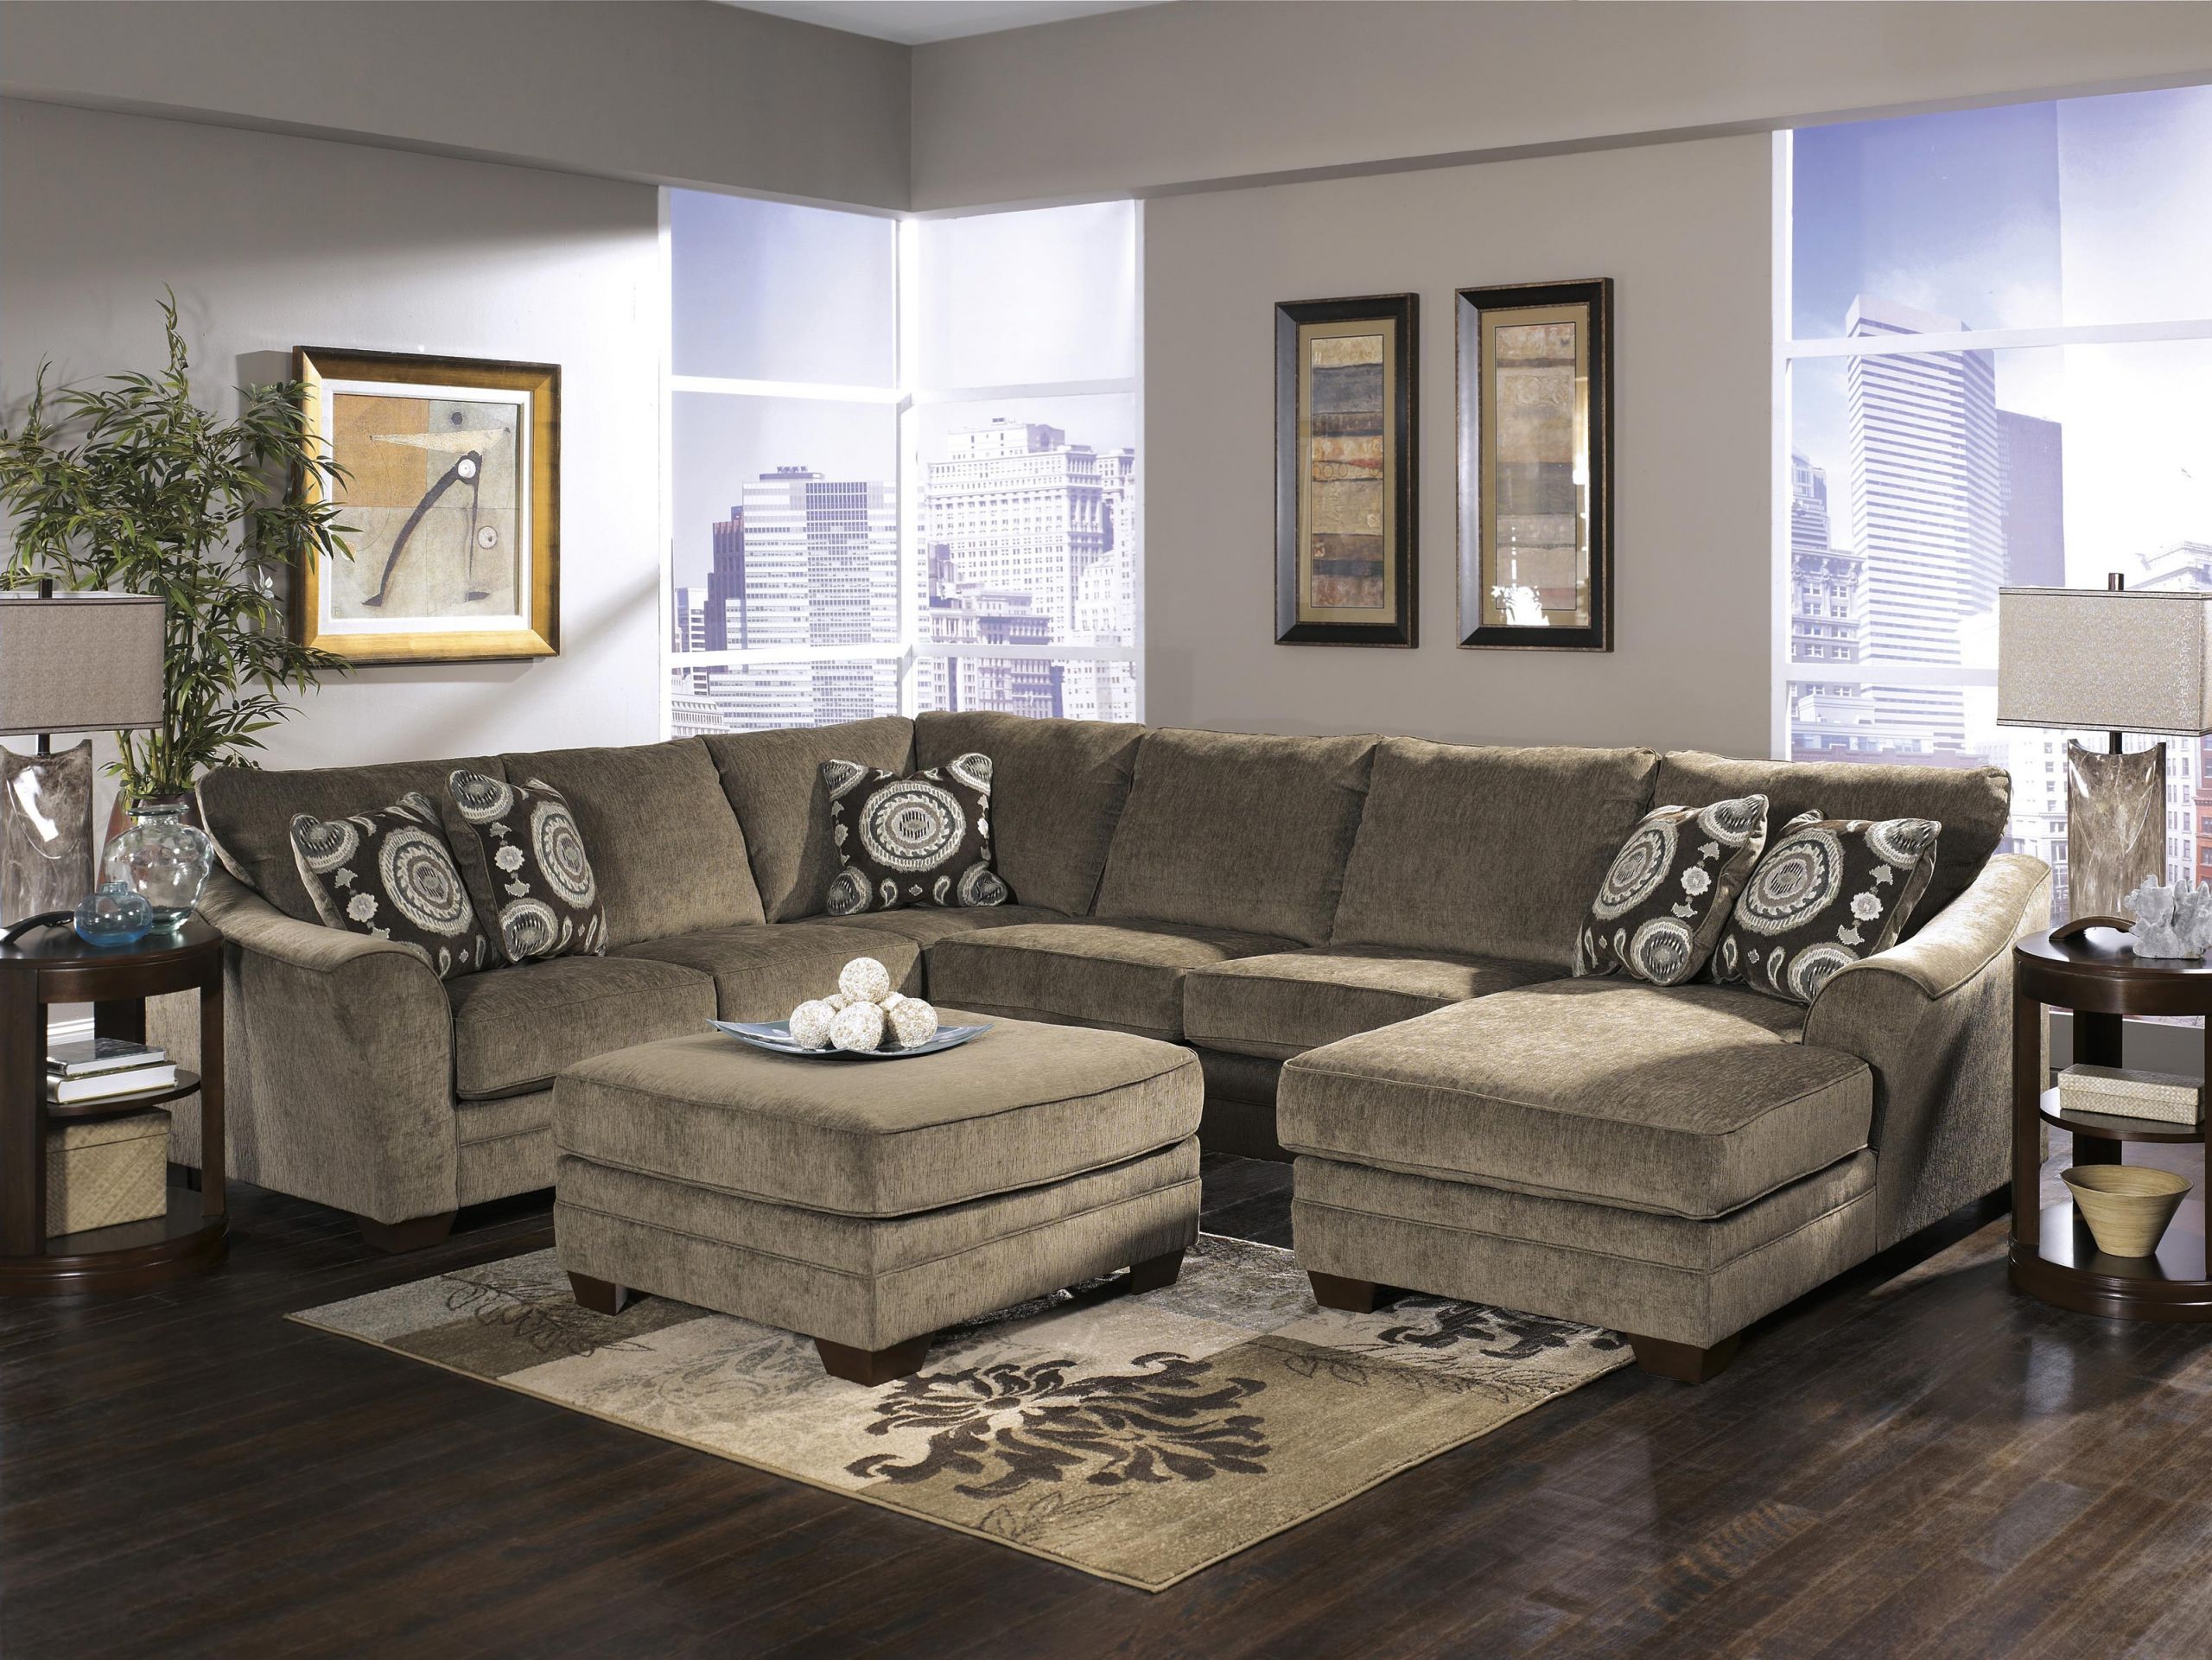 Small Living Room With Sectionals
 Living Room Ideas with Sectionals Sofa for Small Living